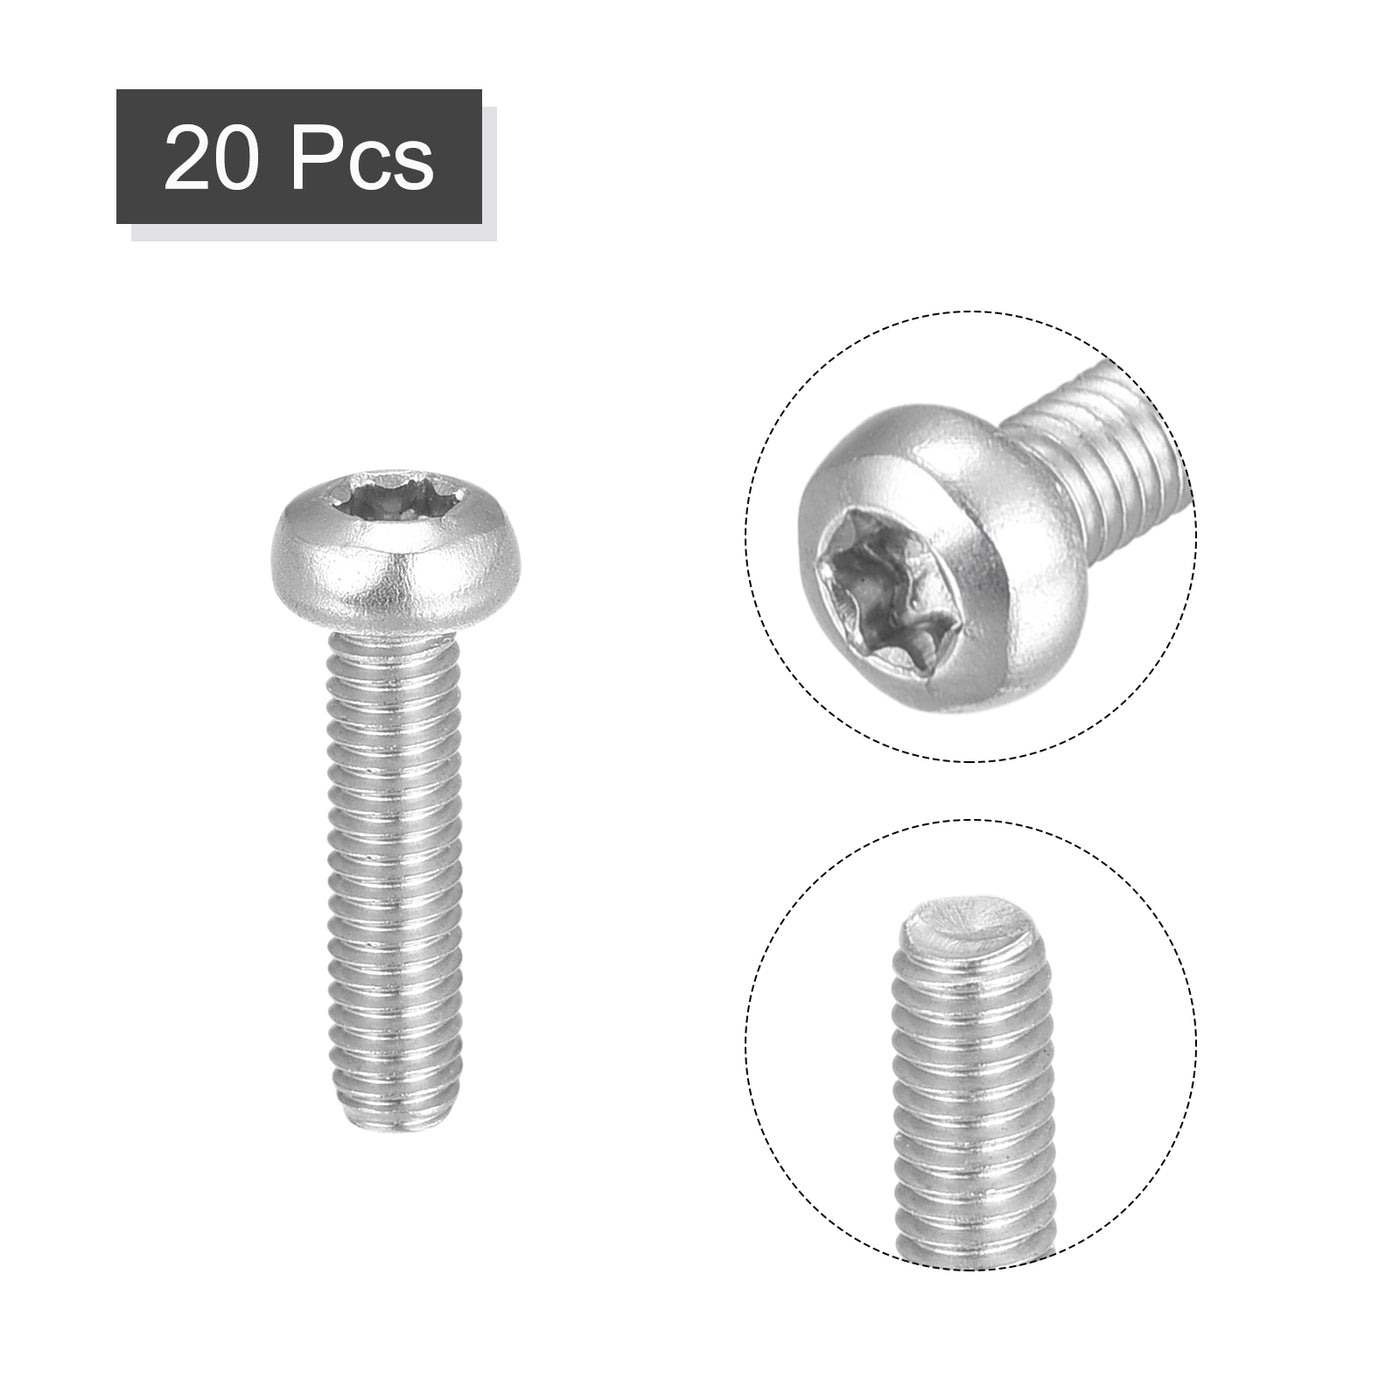 uxcell Uxcell M3x12mm Torx Security Machine Screws, 20pcs 316 Stainless Steel Pan Head Screw